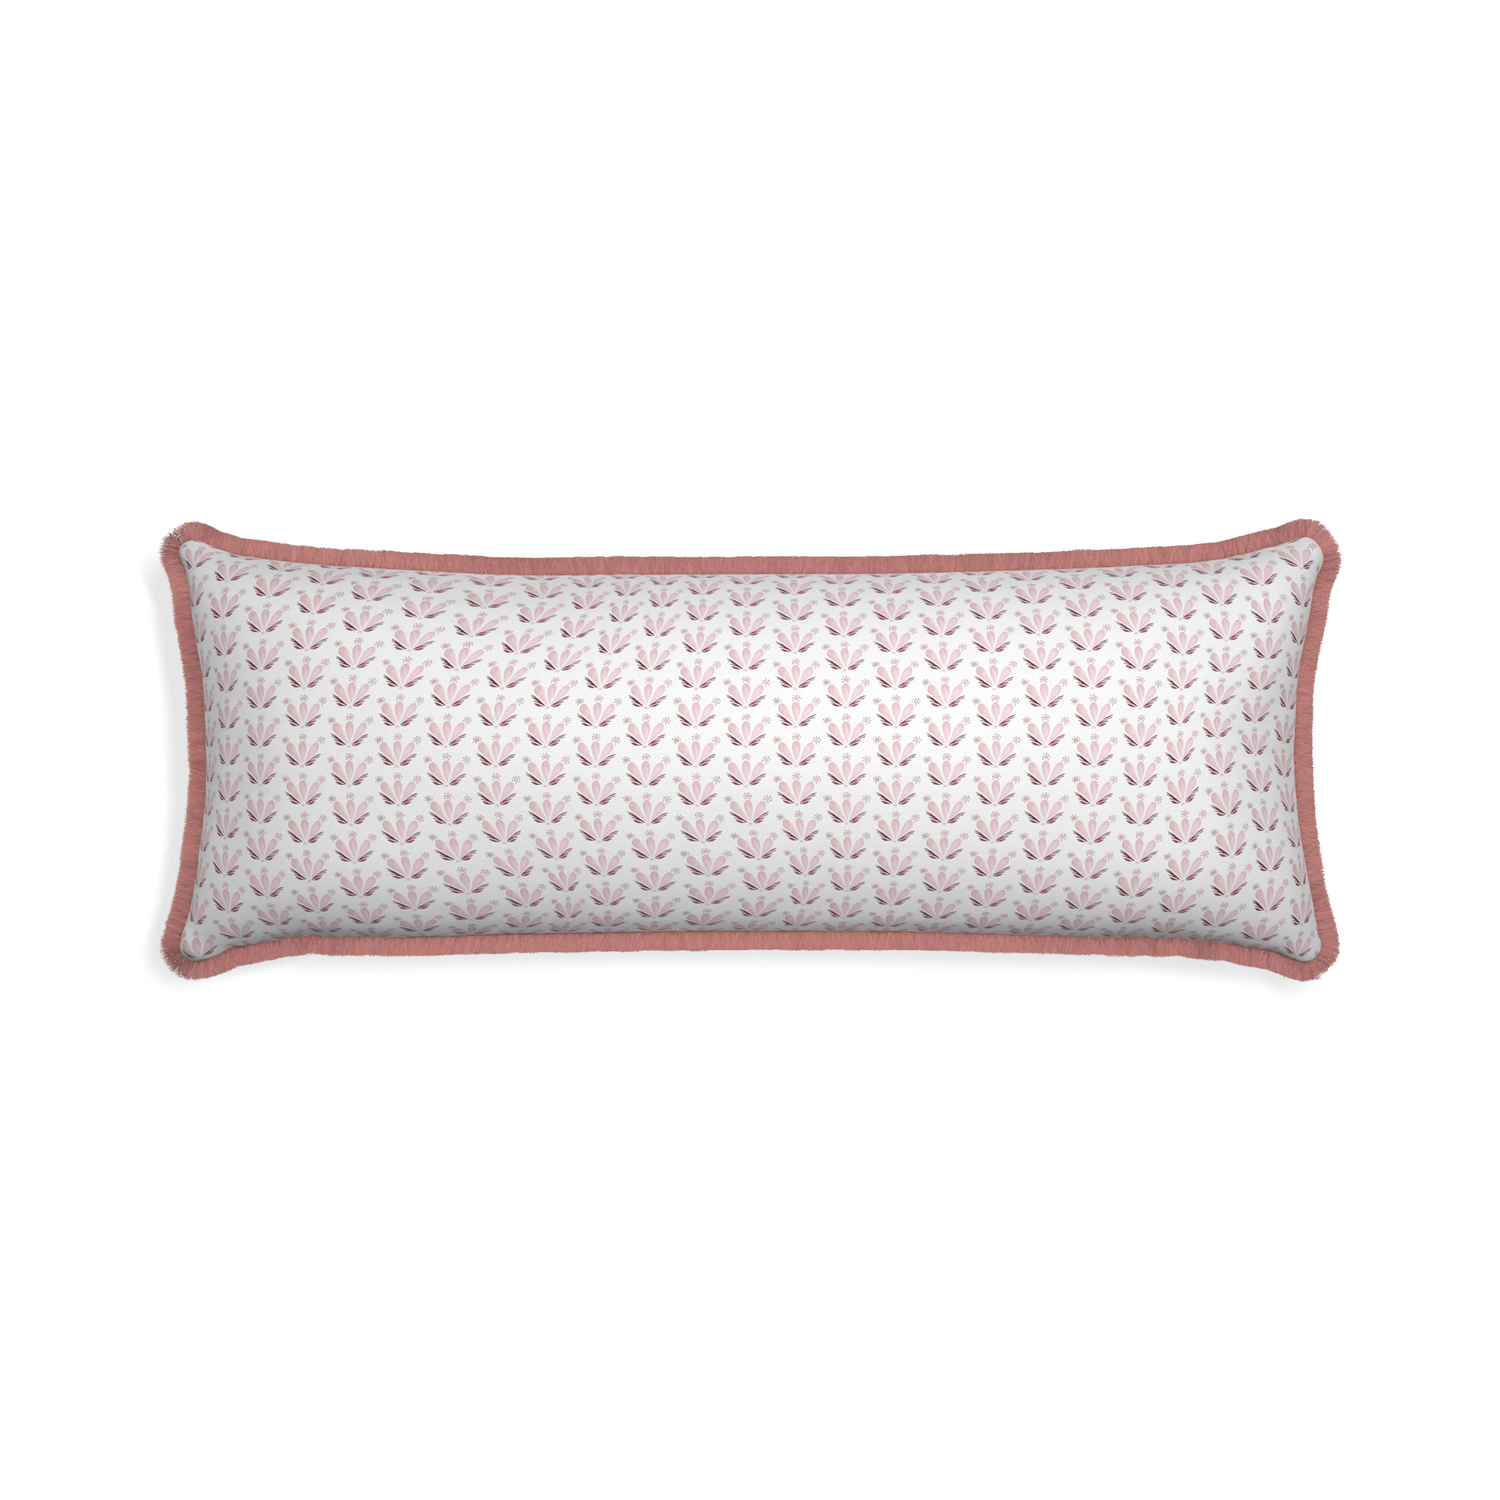 Xl-lumbar serena pink custom pink & burgundy drop repeat floralpillow with d fringe on white background